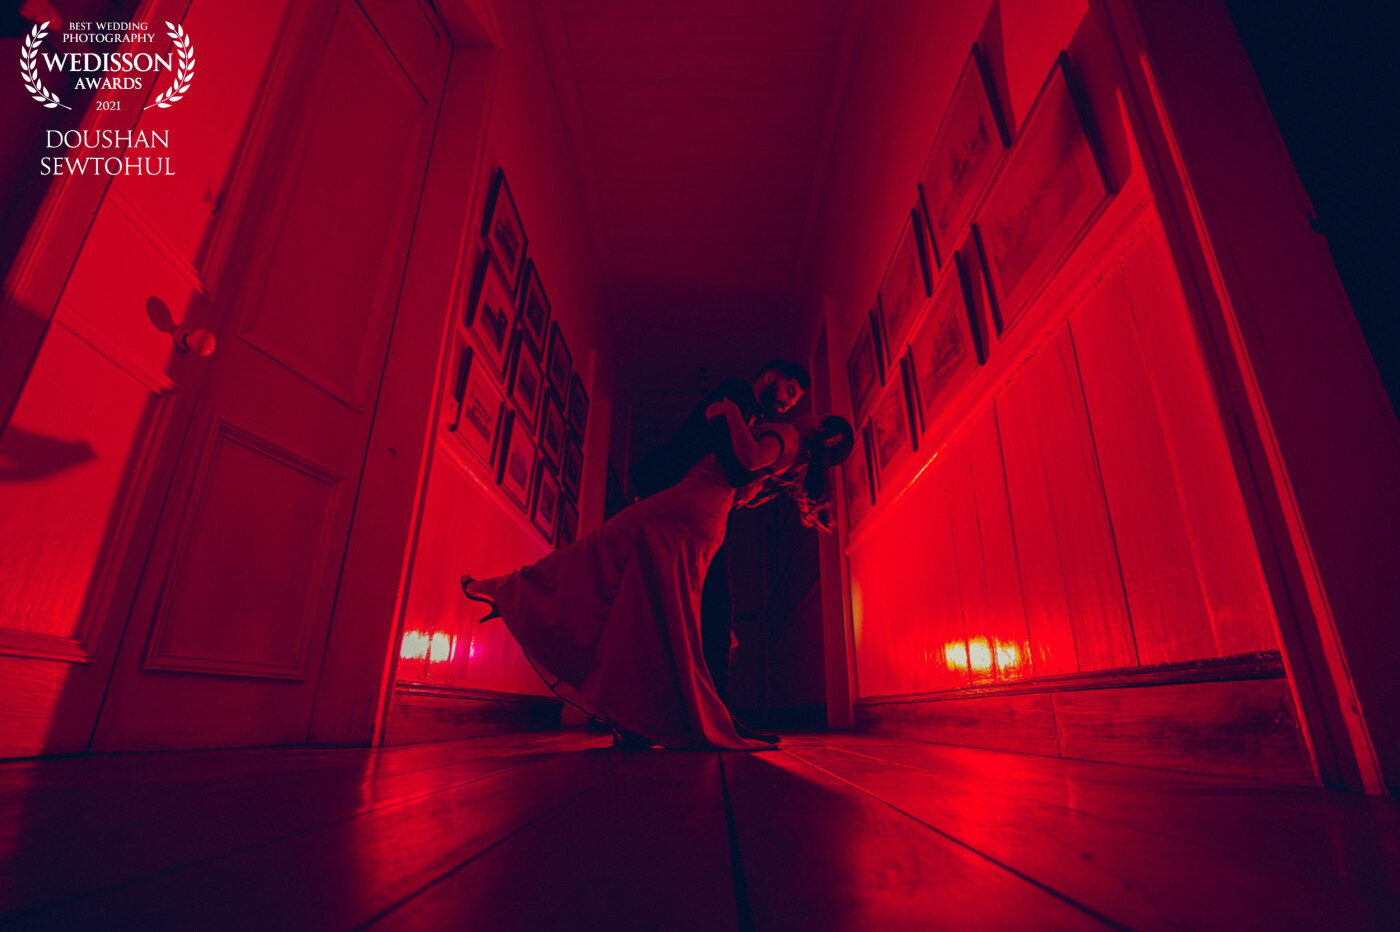 When you have client who is adamant on having at least one Wedisson Award picture, you strive to give your best and  excel .<br />
<br />
A very difficult shoot, playing with colours and creating the mood. The corridor was completely dark and even scary. <br />
<br />
But thanks to couple for playing the game perfectly<br />
#Kushal<br />
#Richa